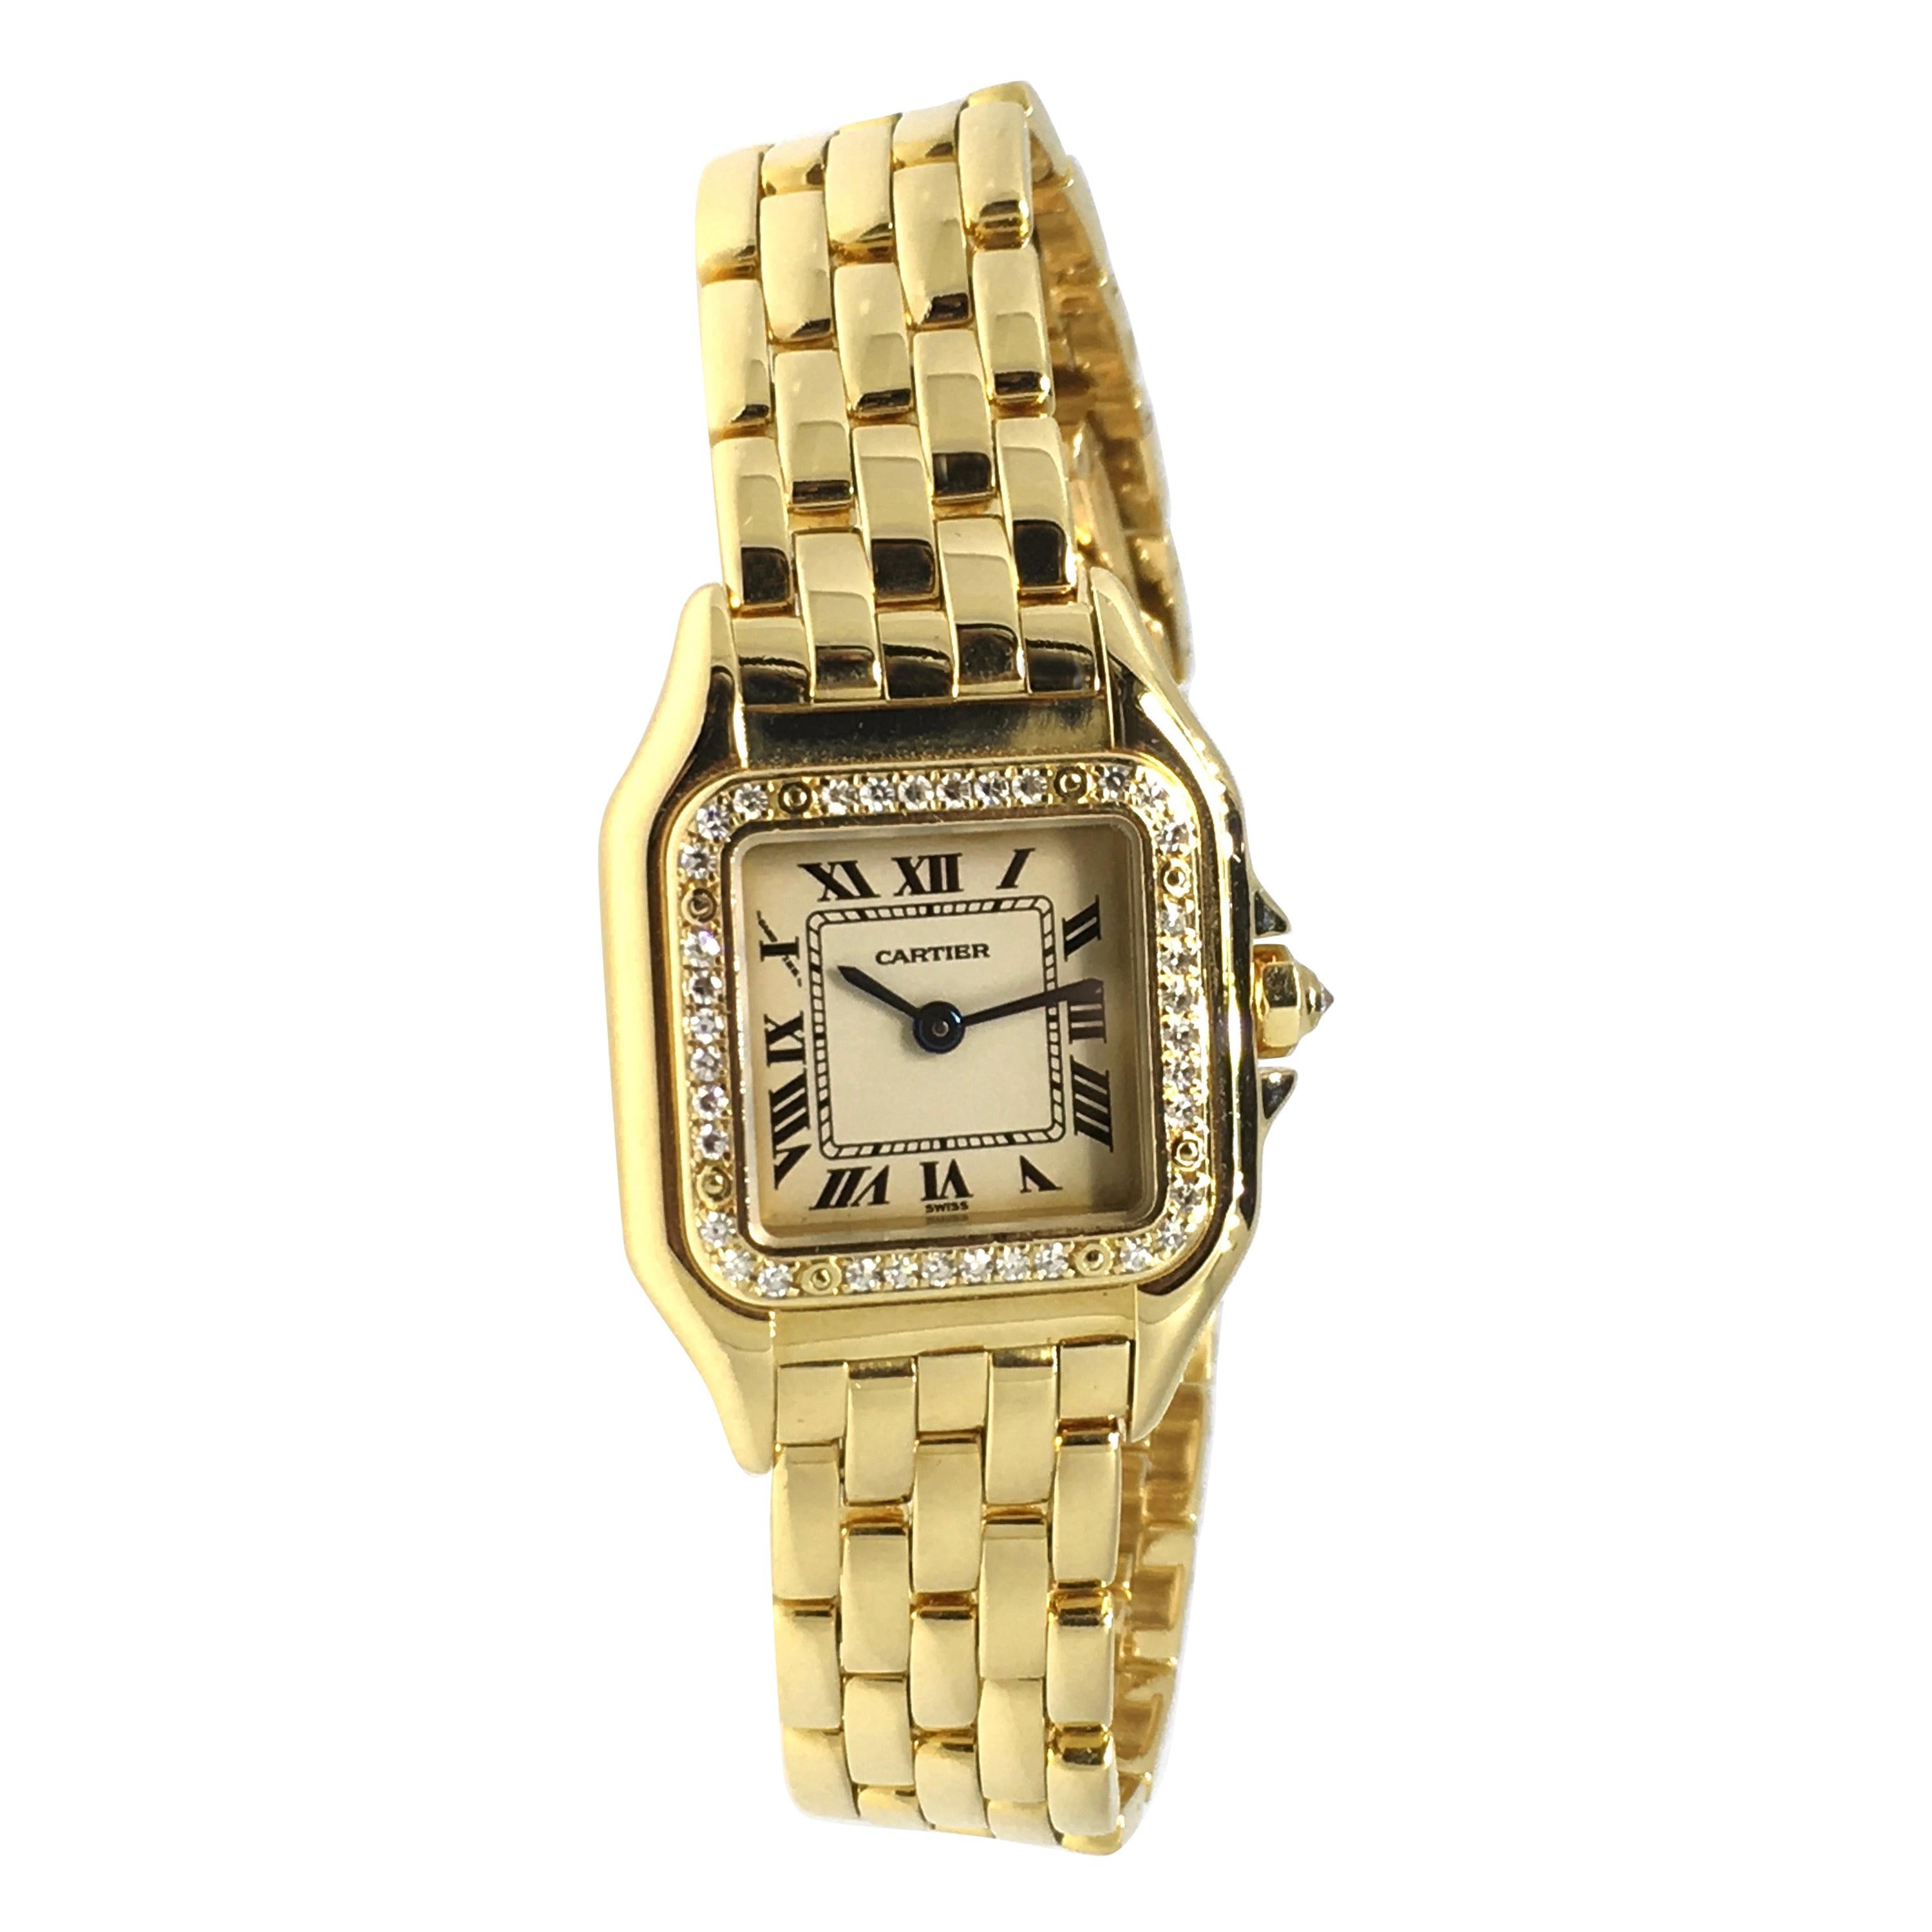 Cartier Panthère, Yellow Gold, Diamonds, Reference 1280-2, Mint Condition